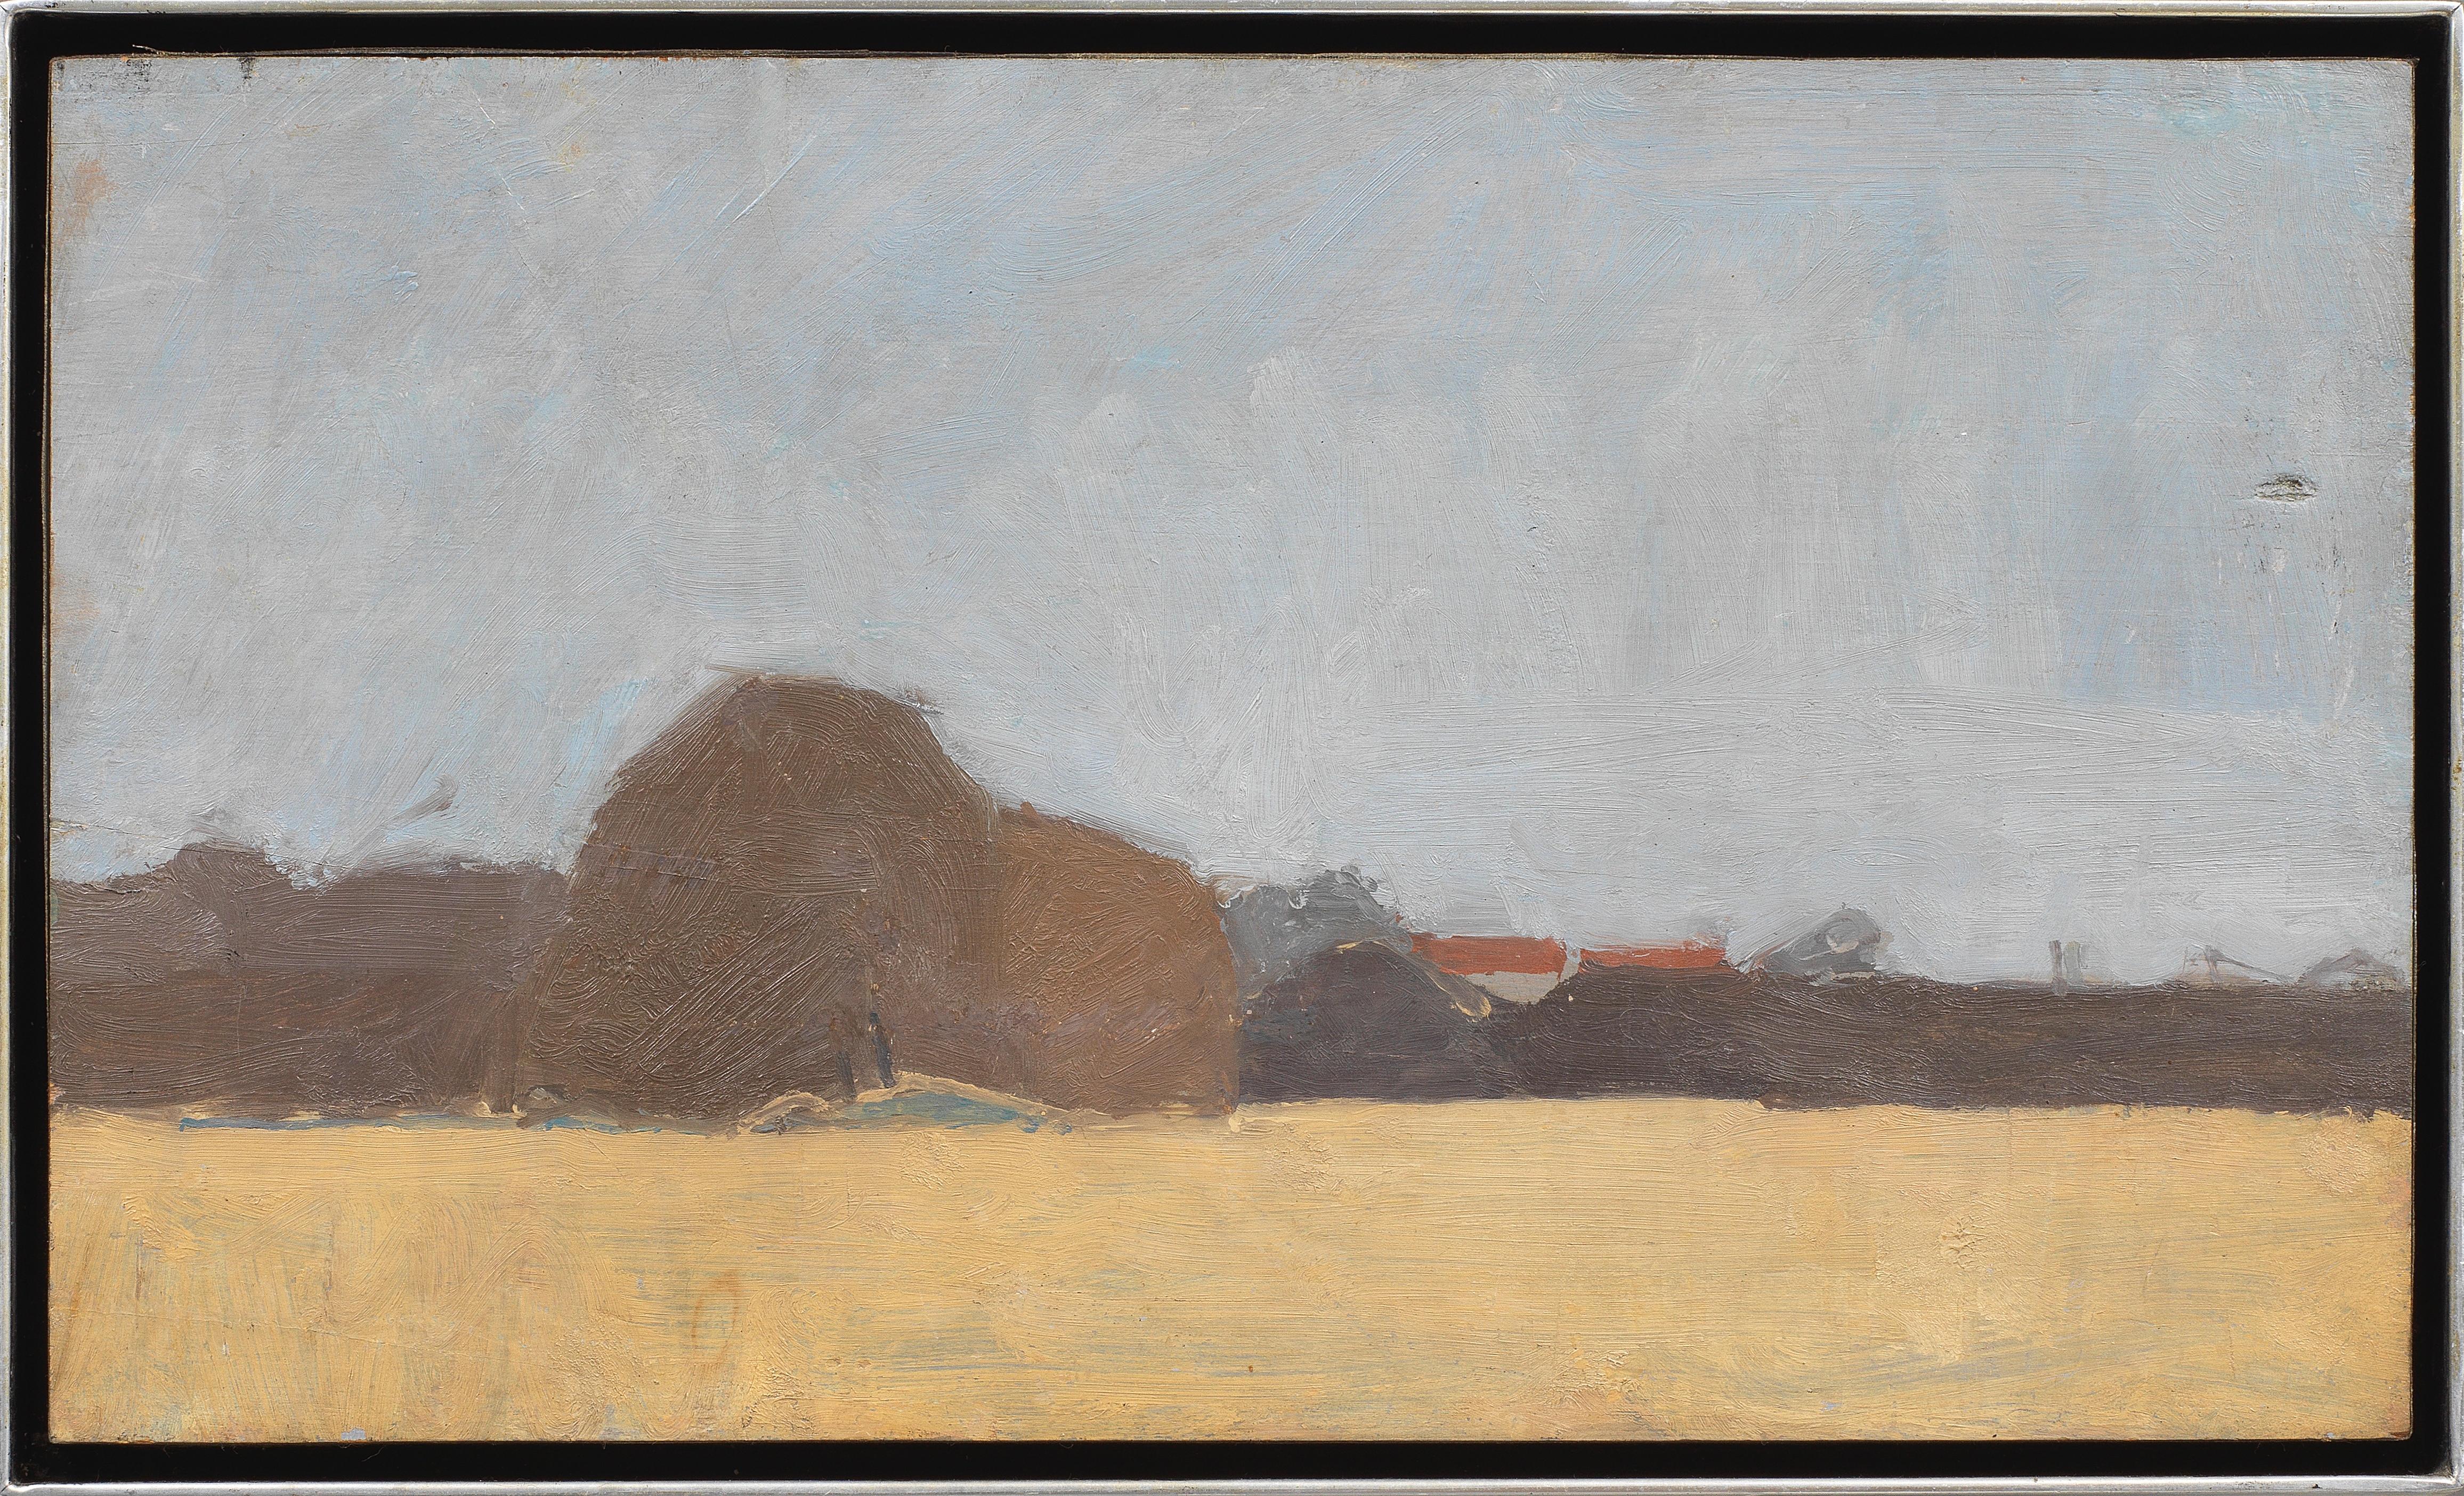 Artwork by Euan Uglow, Landscape, Edge of Field, Made of oil on board